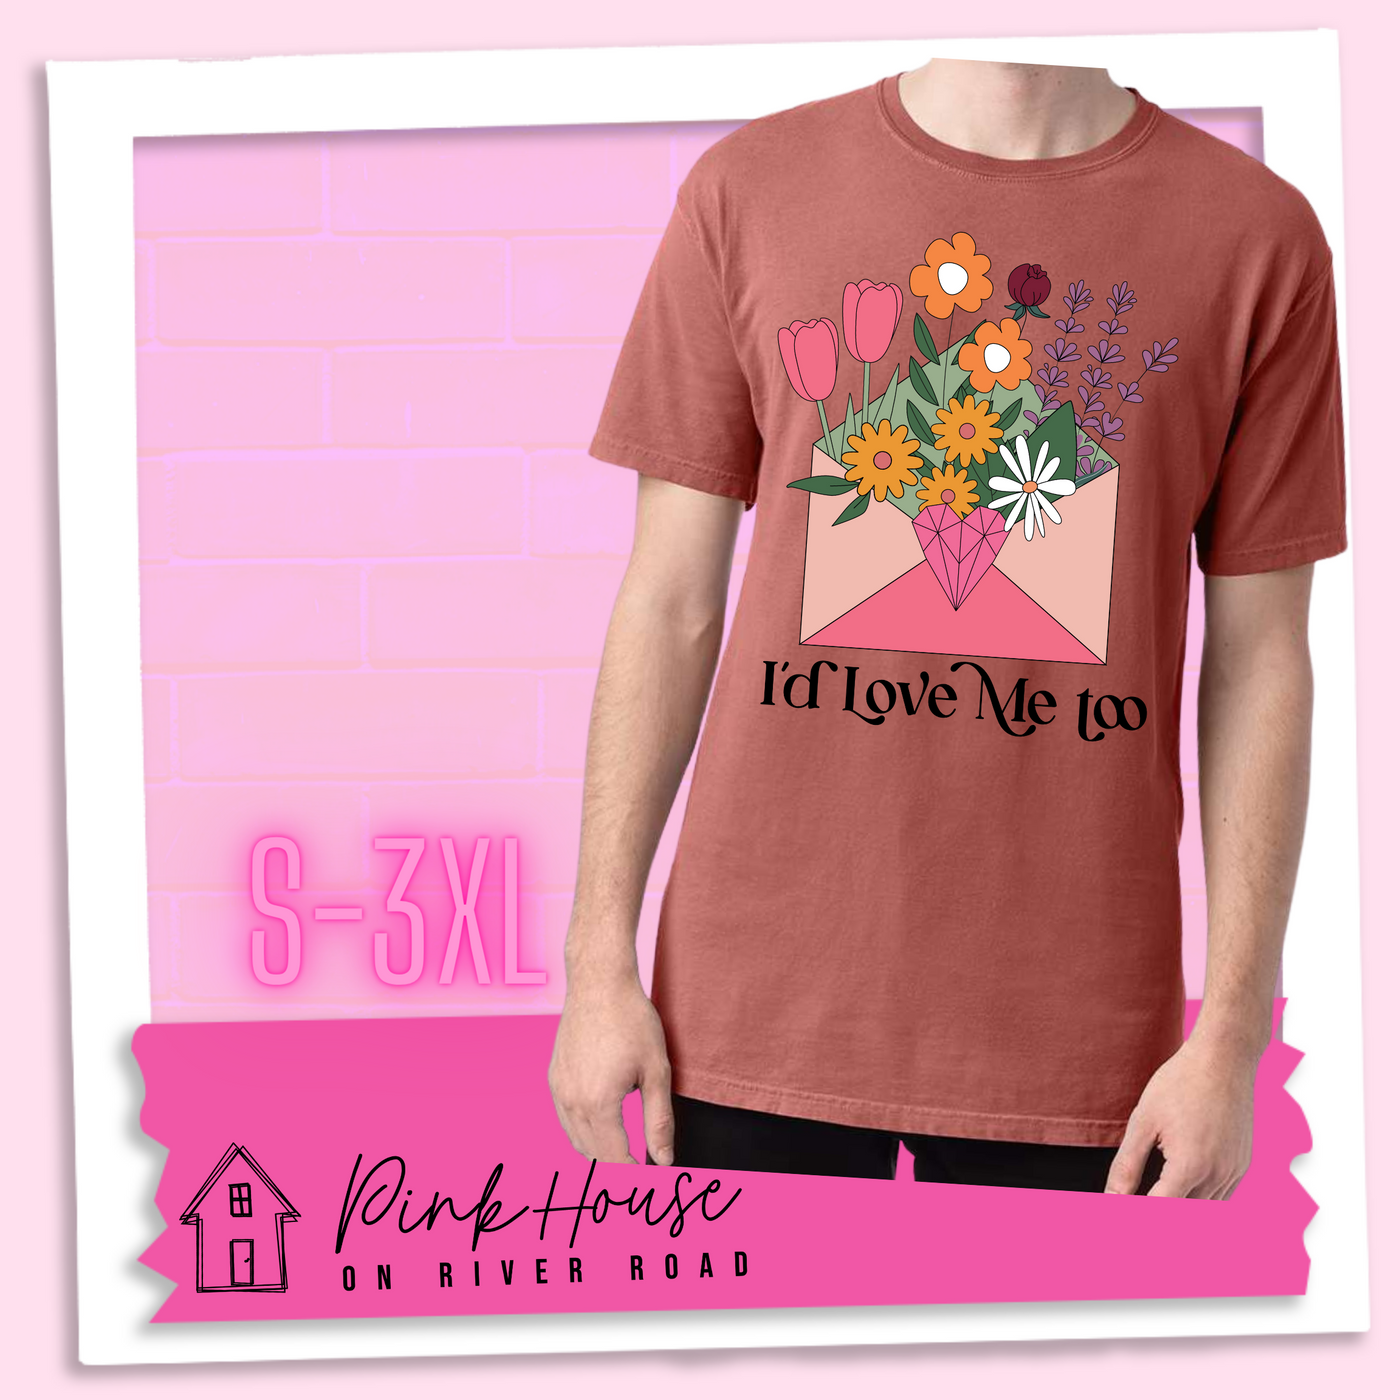 Nantucket Red tee with a graphic of a pink envelope filled with different types of flowers and a geometric heart seal. The text underneath reads "I'd Love Me Too"